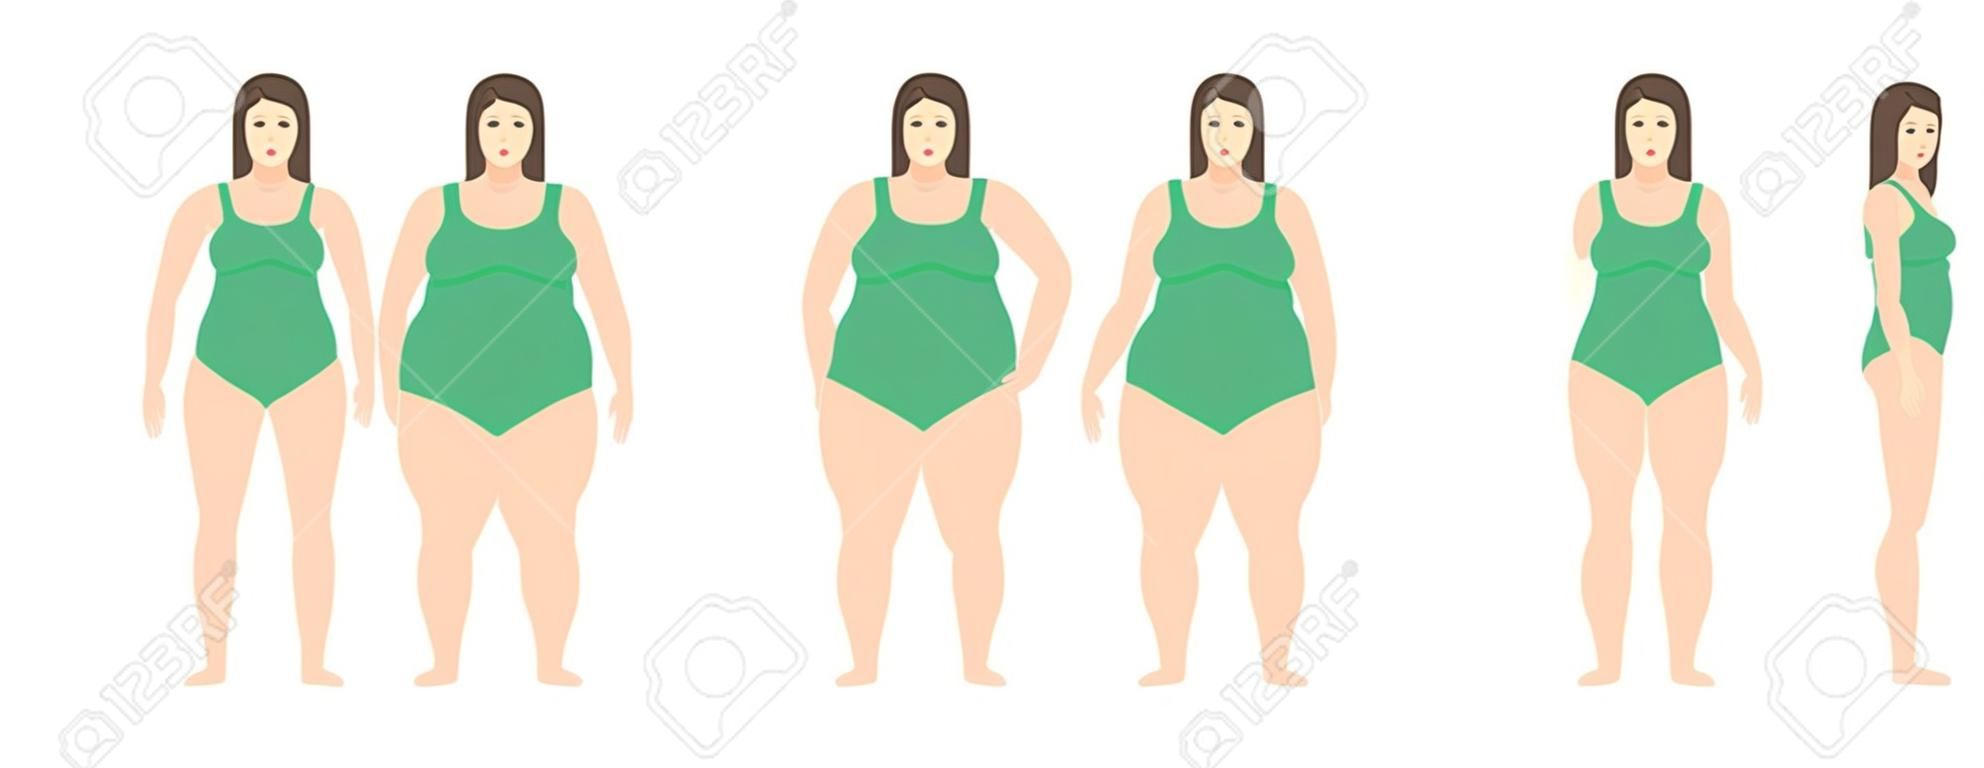 Vector illustration  of women with different  weight from anorexia to extremely obese. Body mass index, weight loss concept.